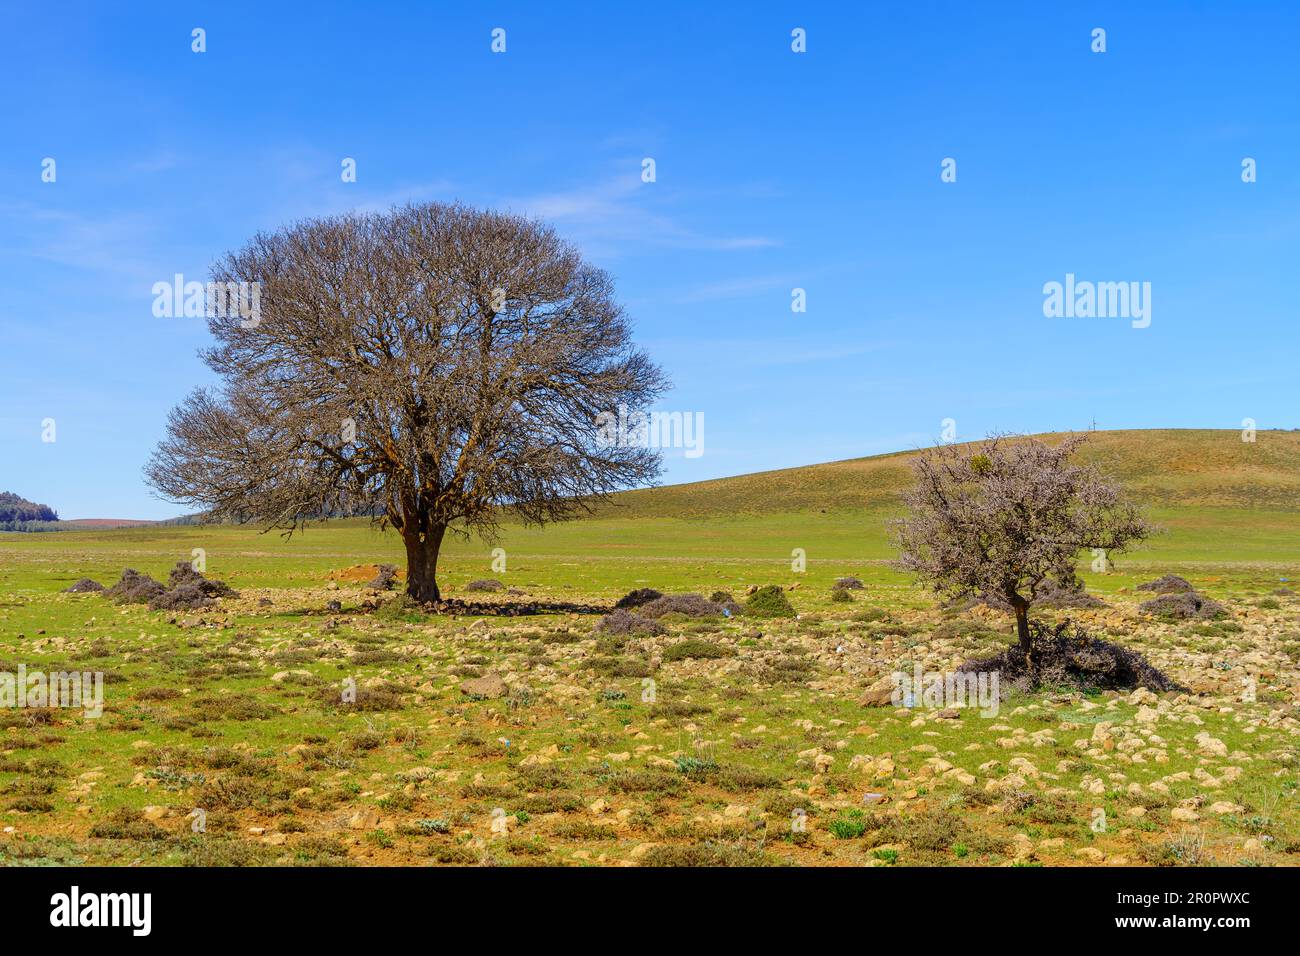 View of a lone tree, in the Middle Atlas Mountains, Morocco Stock Photo